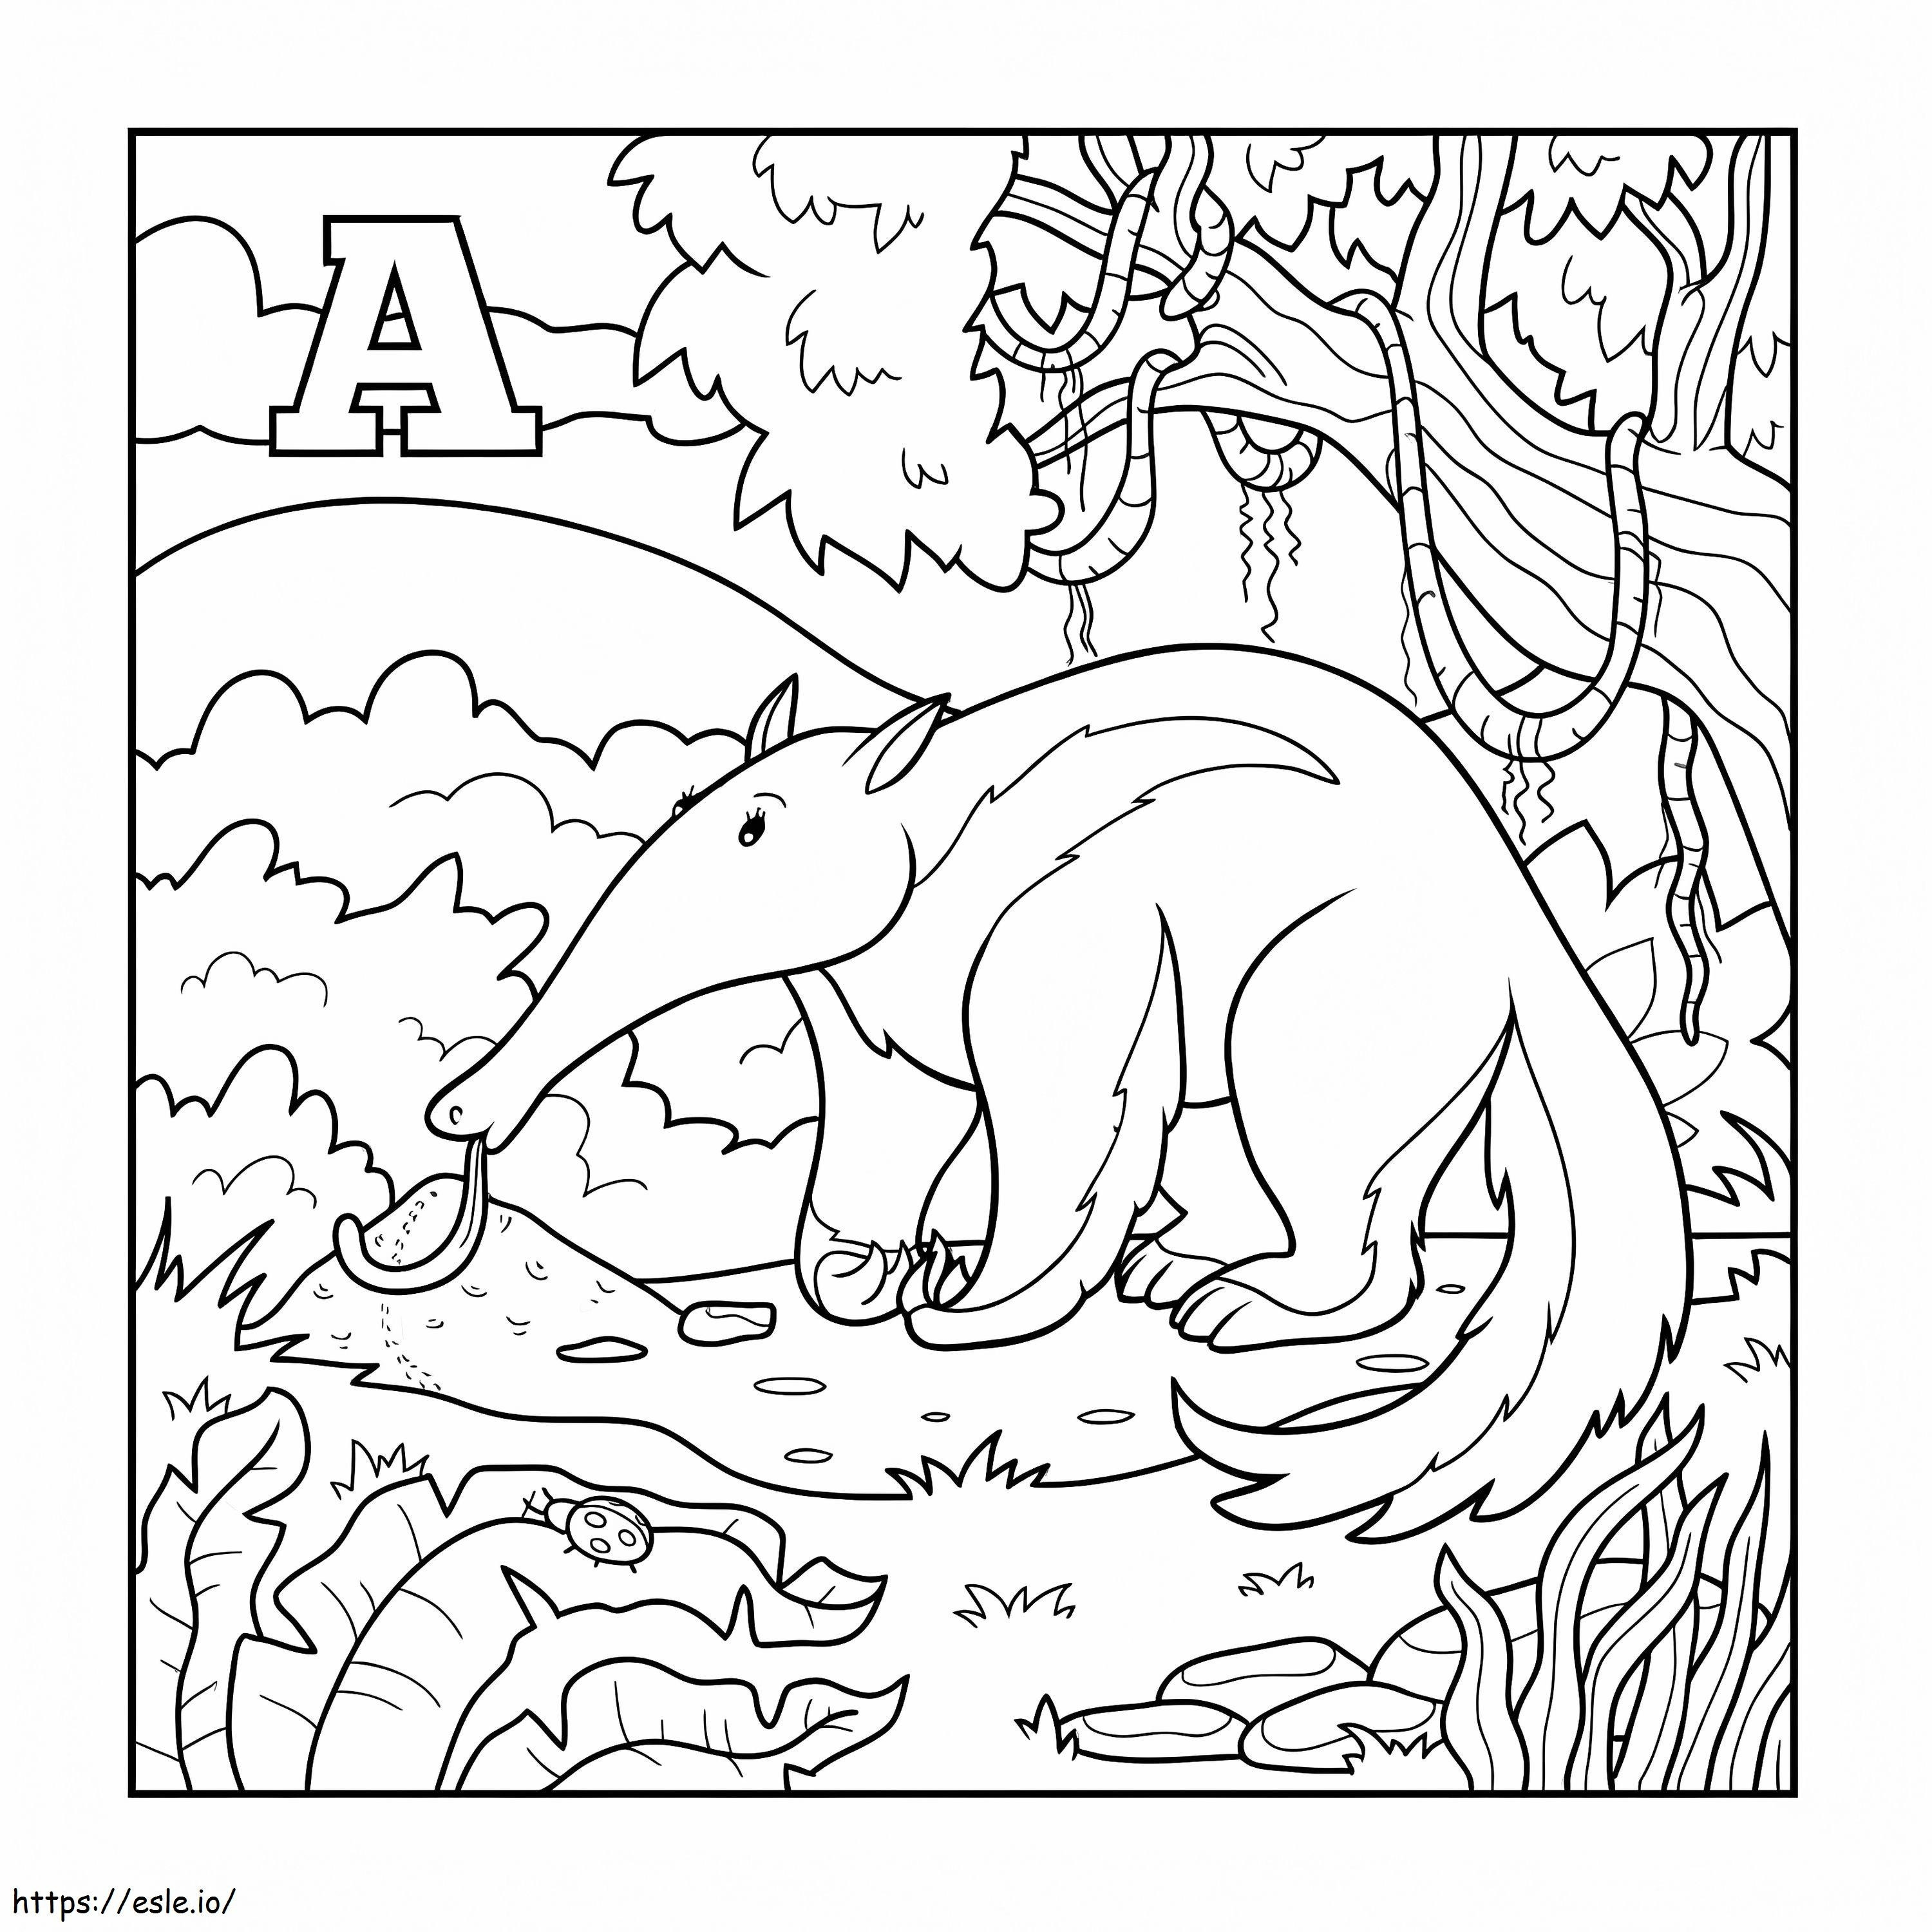 A Wild Anteater coloring page